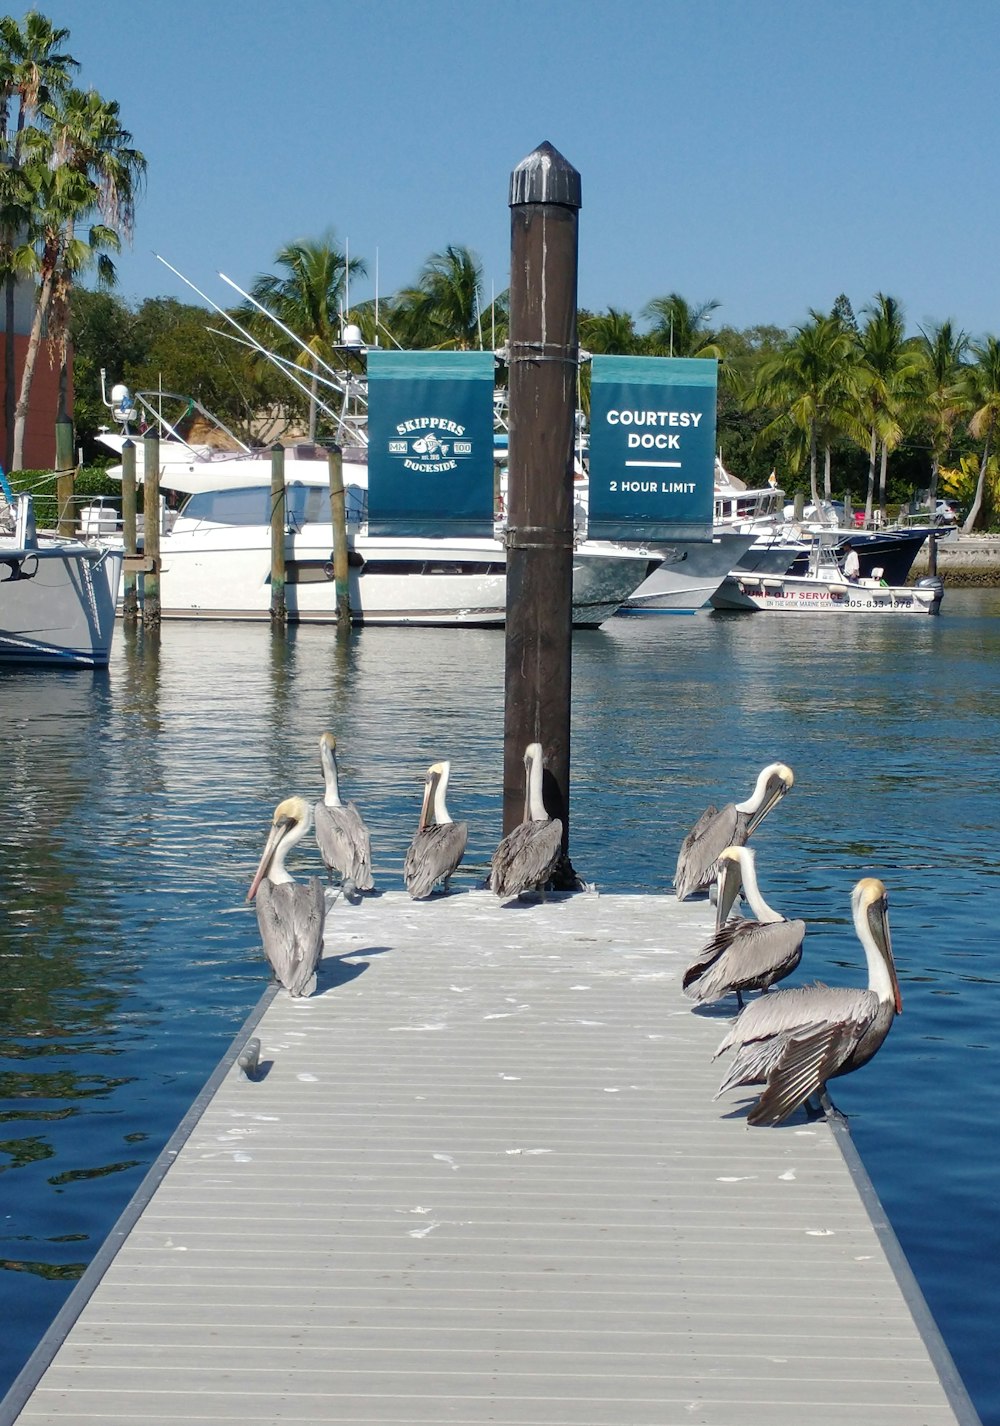 a flock of birds sitting on a dock next to a body of water